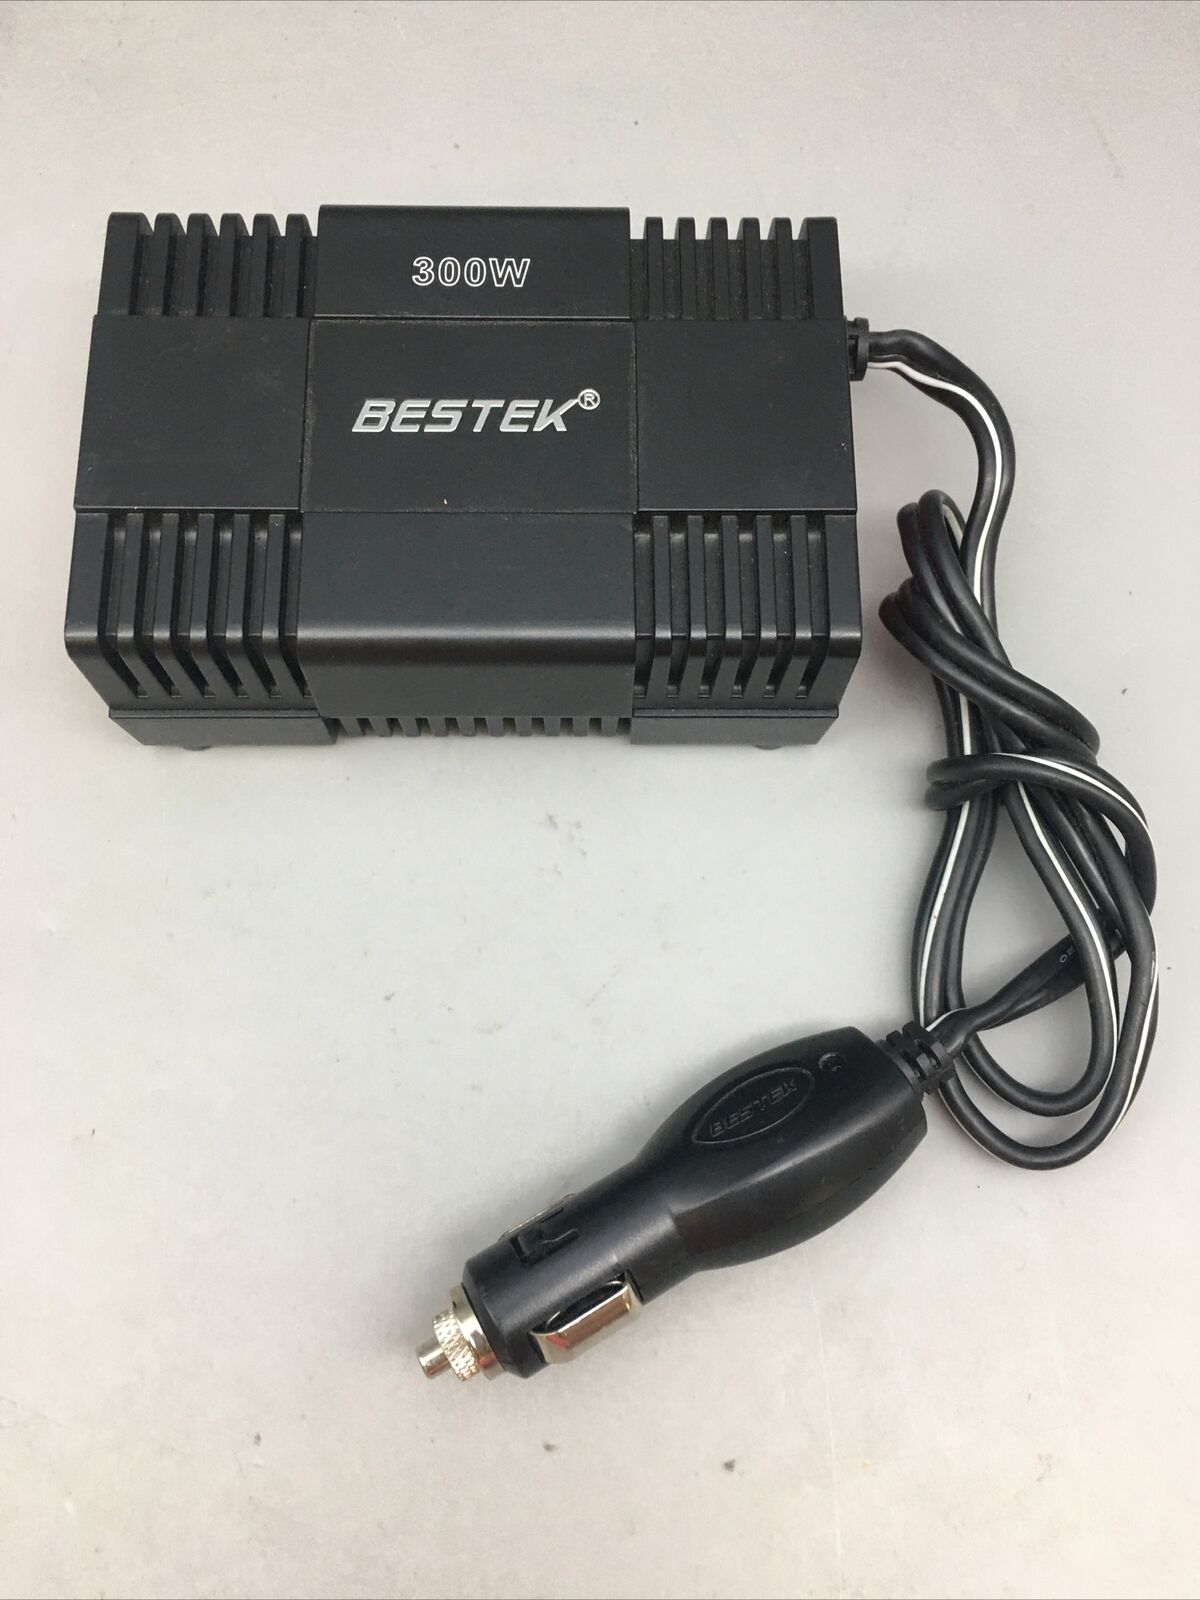 BESTEK 300W Power Inverter DC 12V to 110V AC Car Adapter with 4.8A Dual USB C26